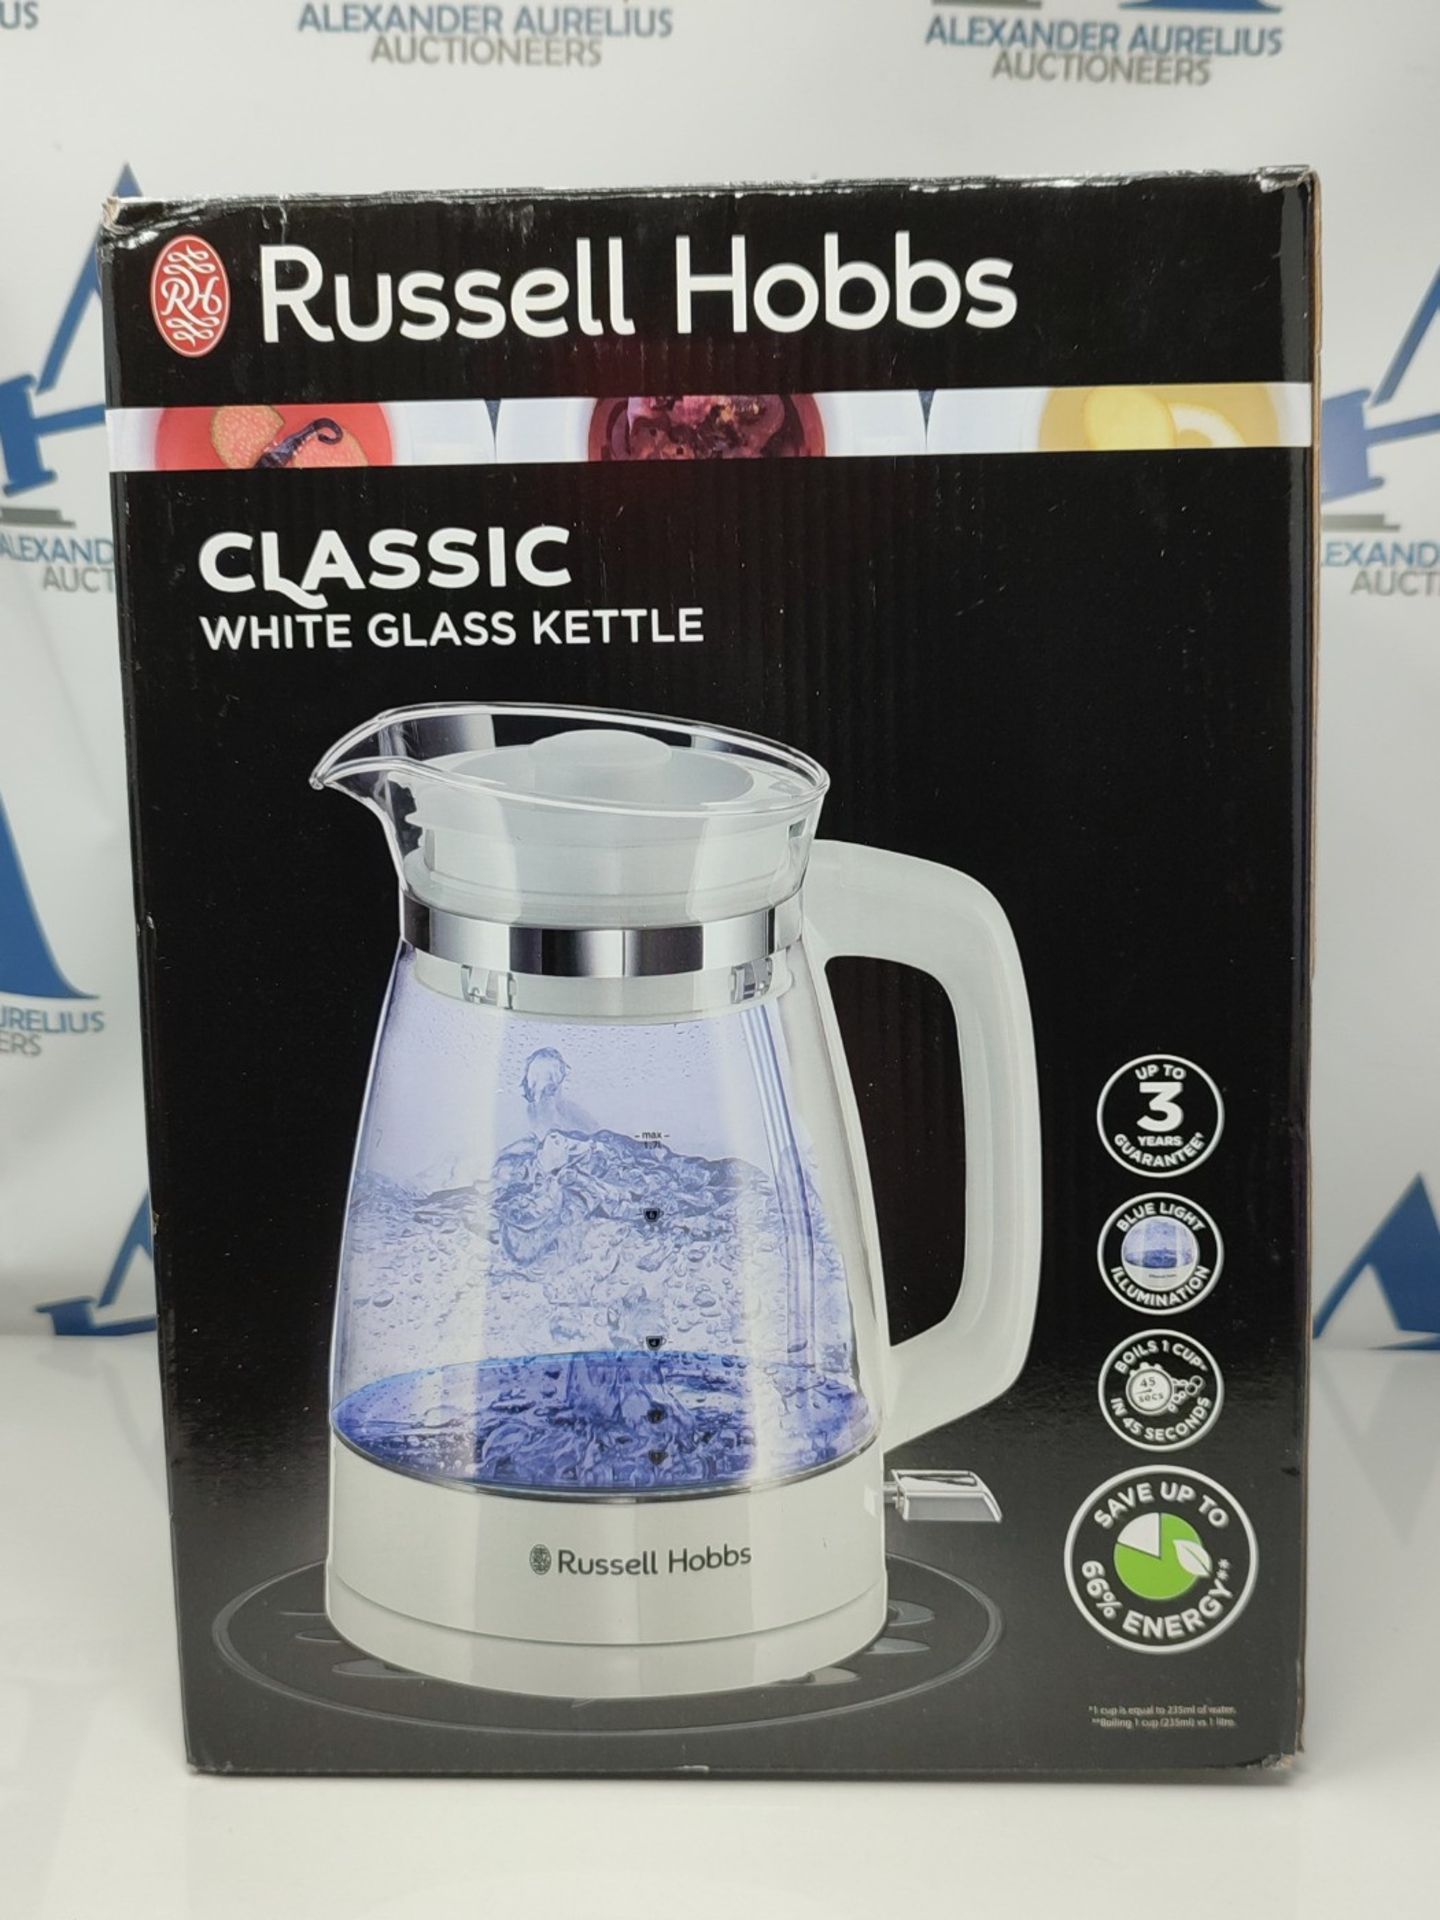 Russell Hobbs 26081 Classic Glass Kettle White - Image 2 of 3